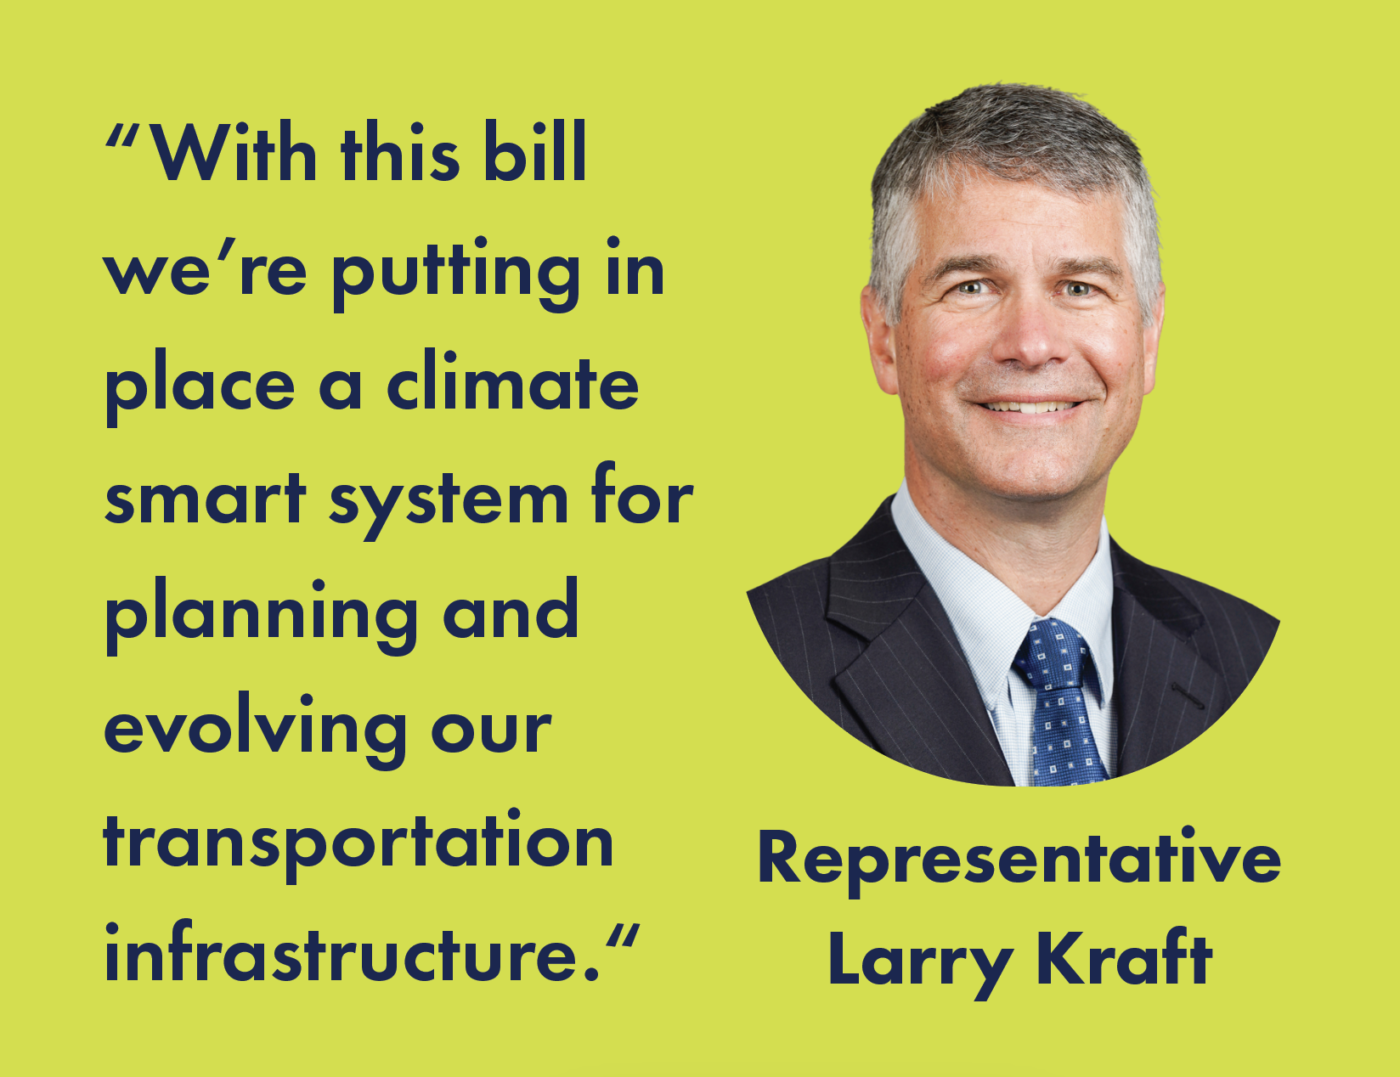 Quote graphic: "With this bill we're putting in place a climate smart system for planning and evolving our transportation infrastructure." - Minnesota State Representative Larry Kraft. Graphic features a profile photo of Rep. Kraft.